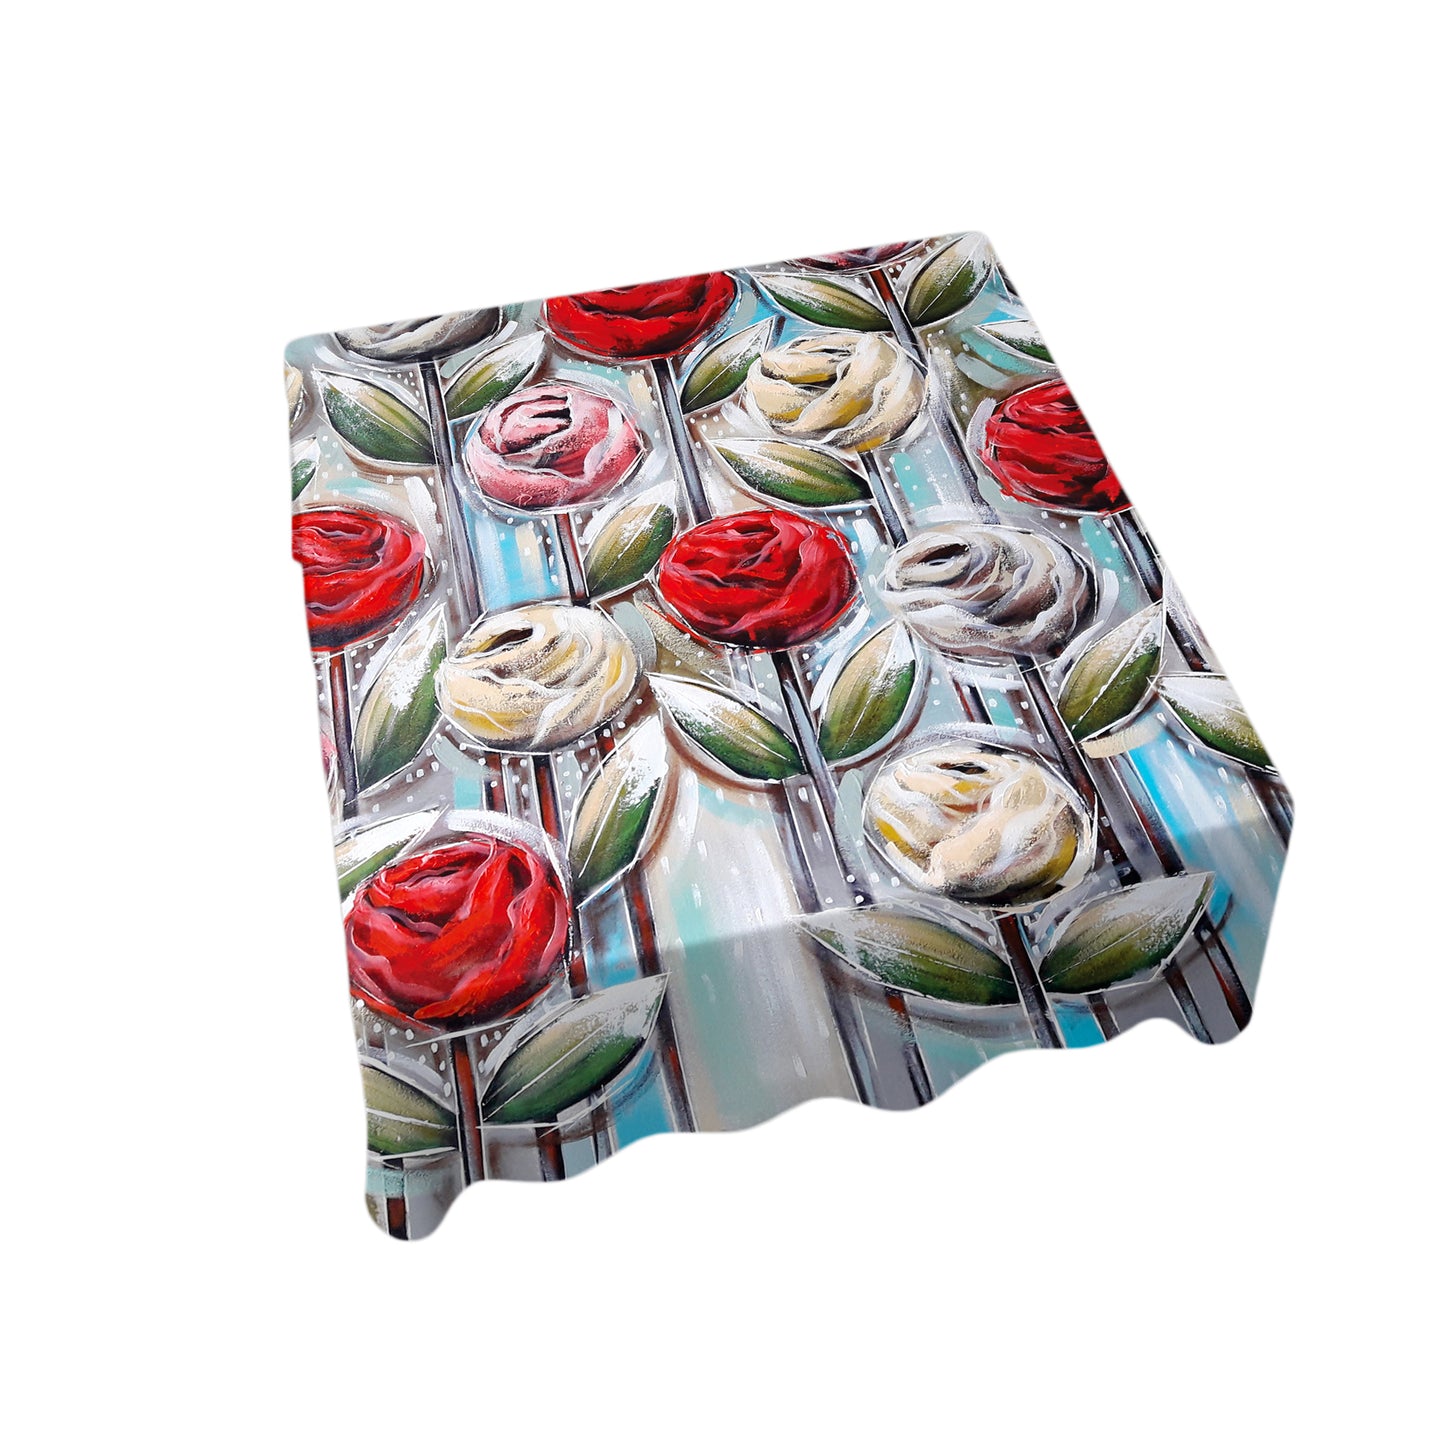 Painted Floral Square Tablecloth